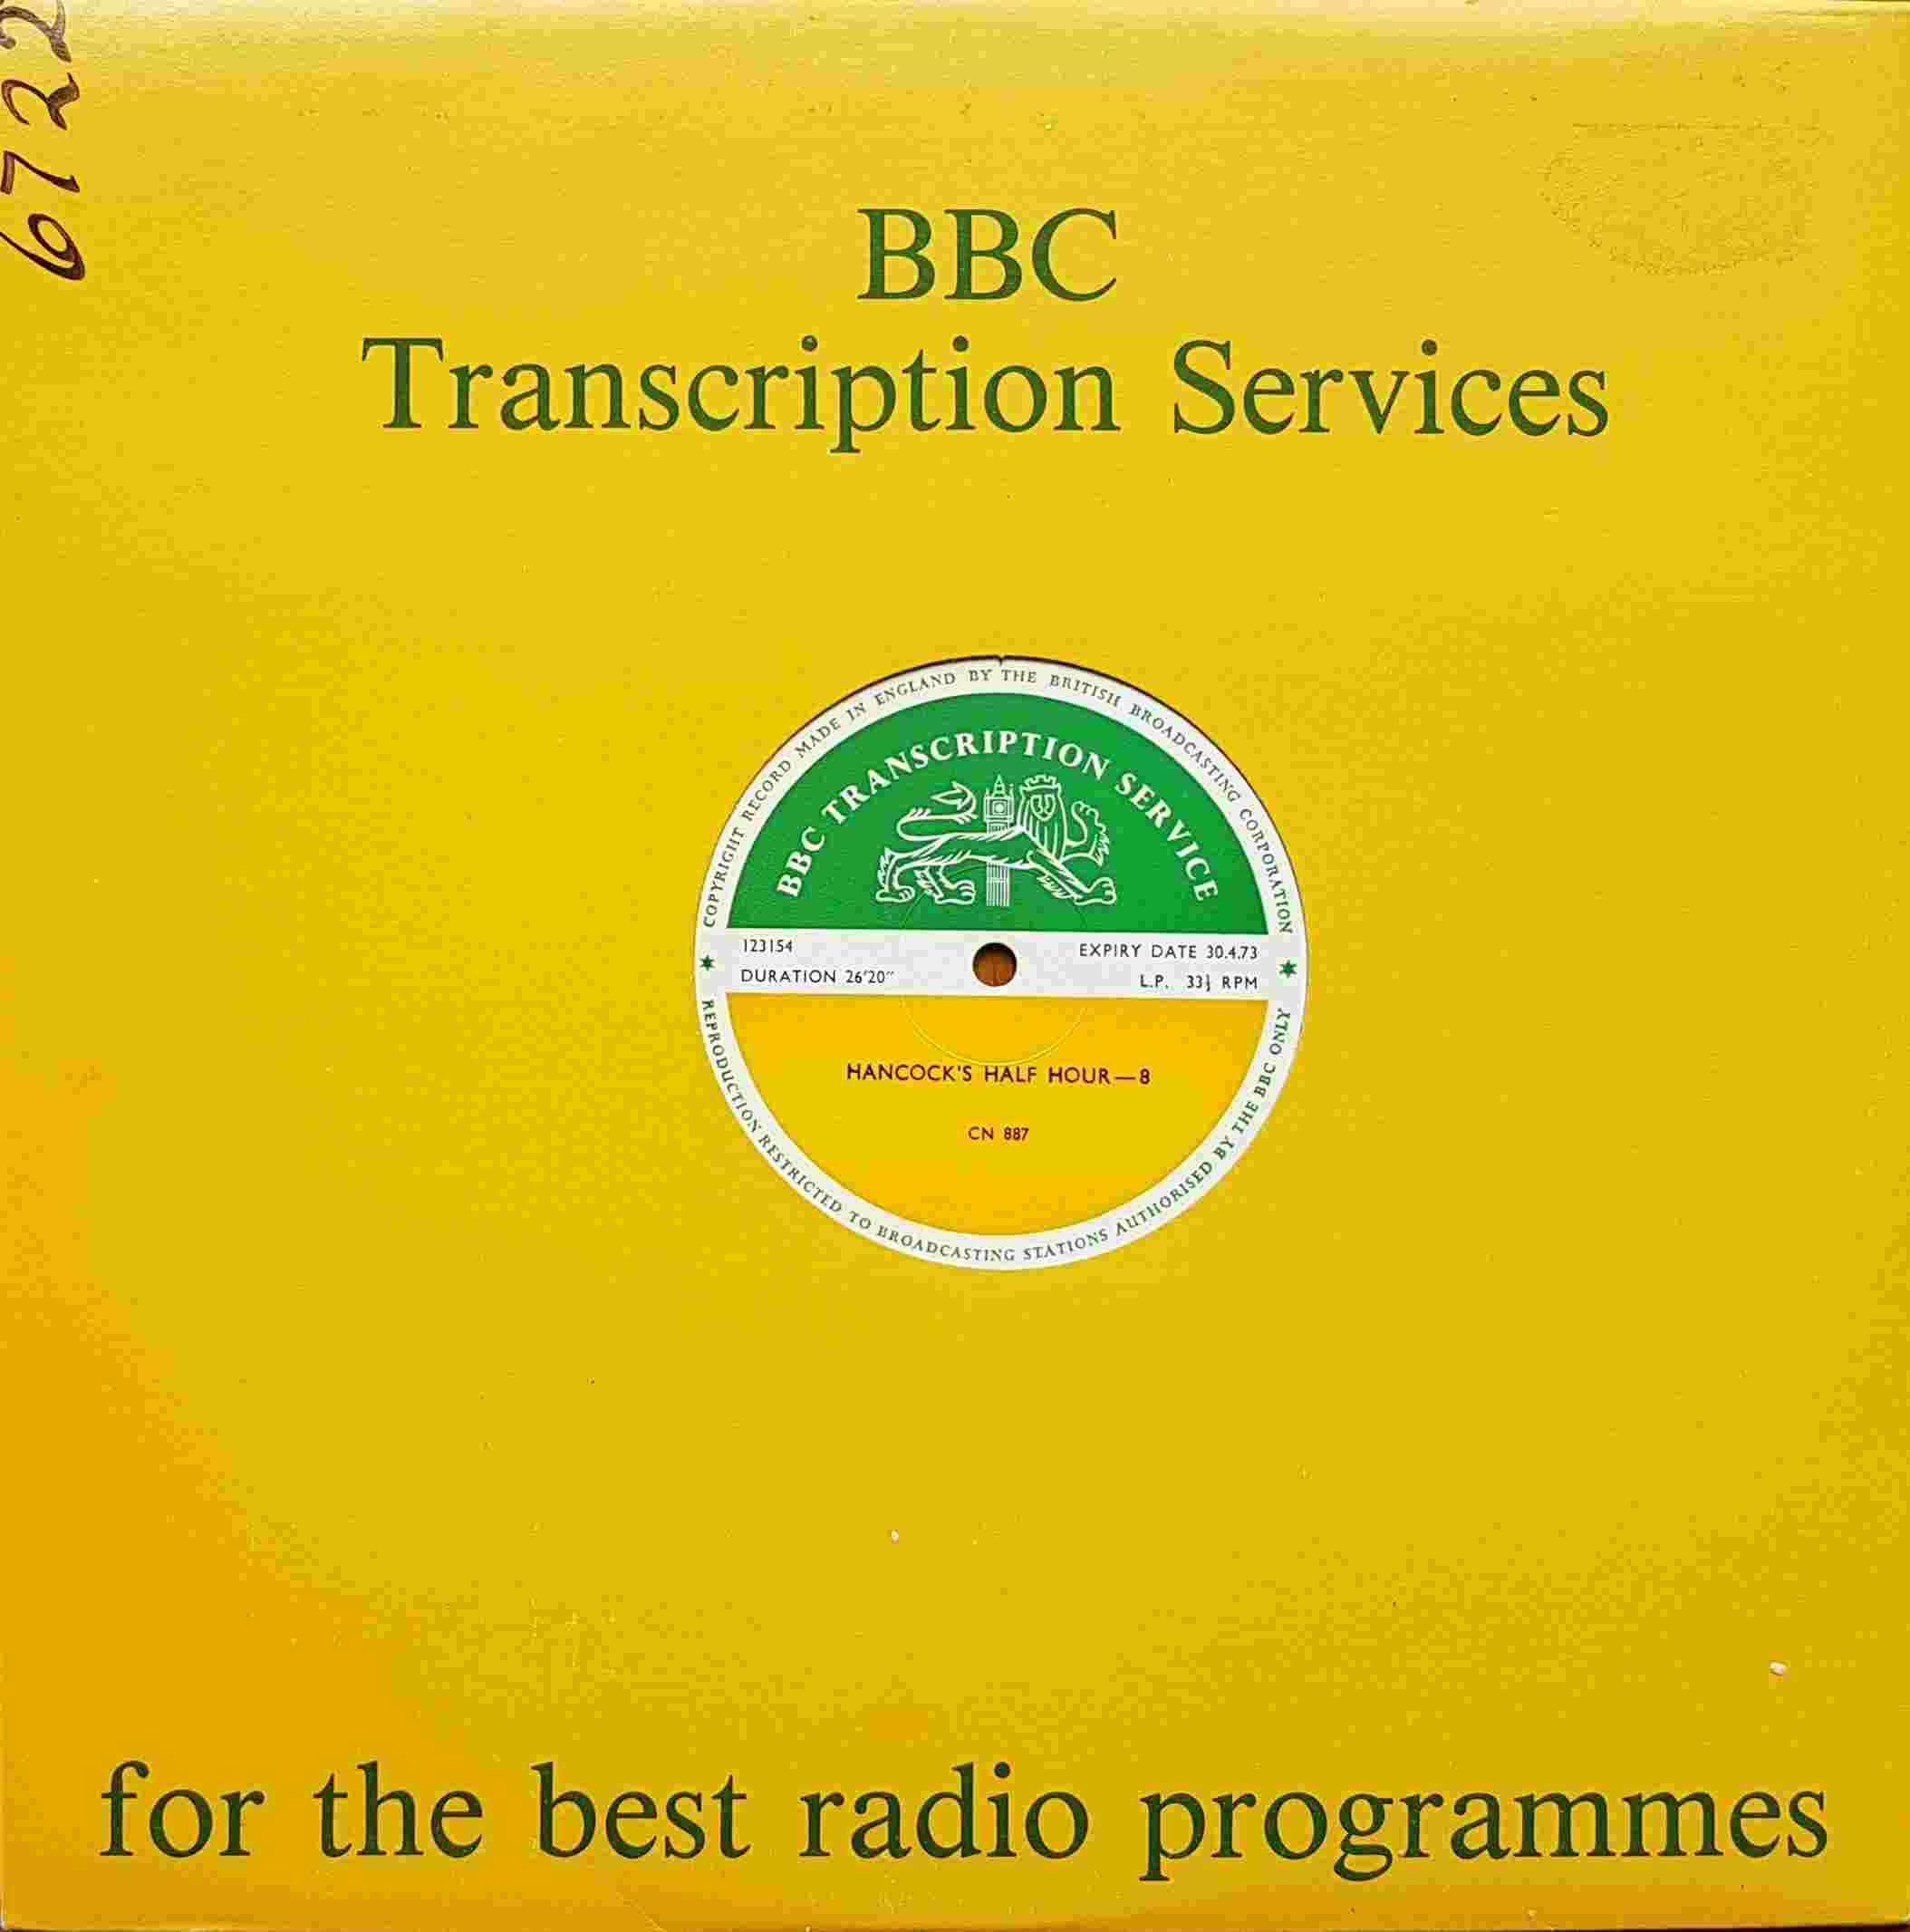 Picture of CN 887 4 Hancock's half hour - 7 & 8 by artist Tony Hancock from the BBC records and Tapes library